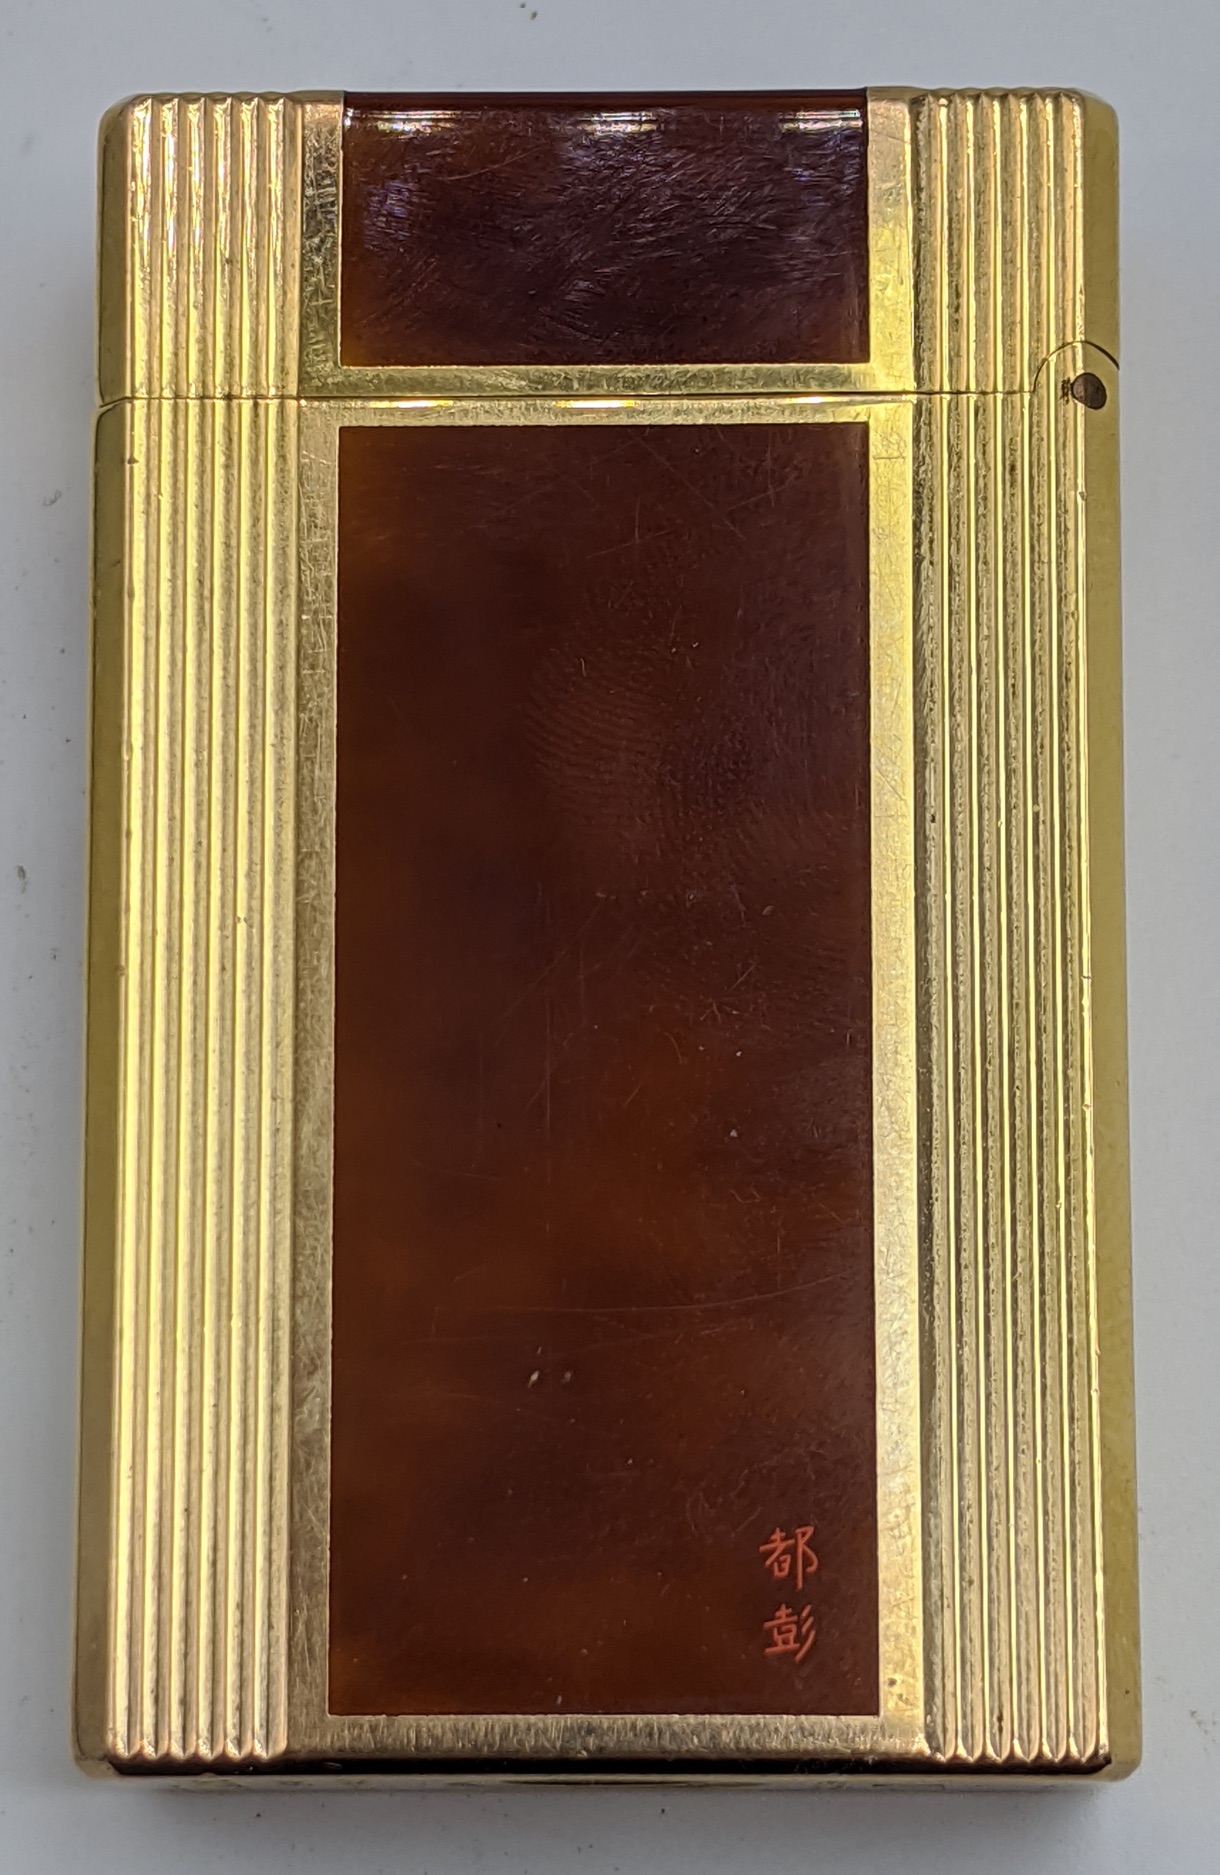 S.T. Dupont gold plated lighter, laque de chine edition